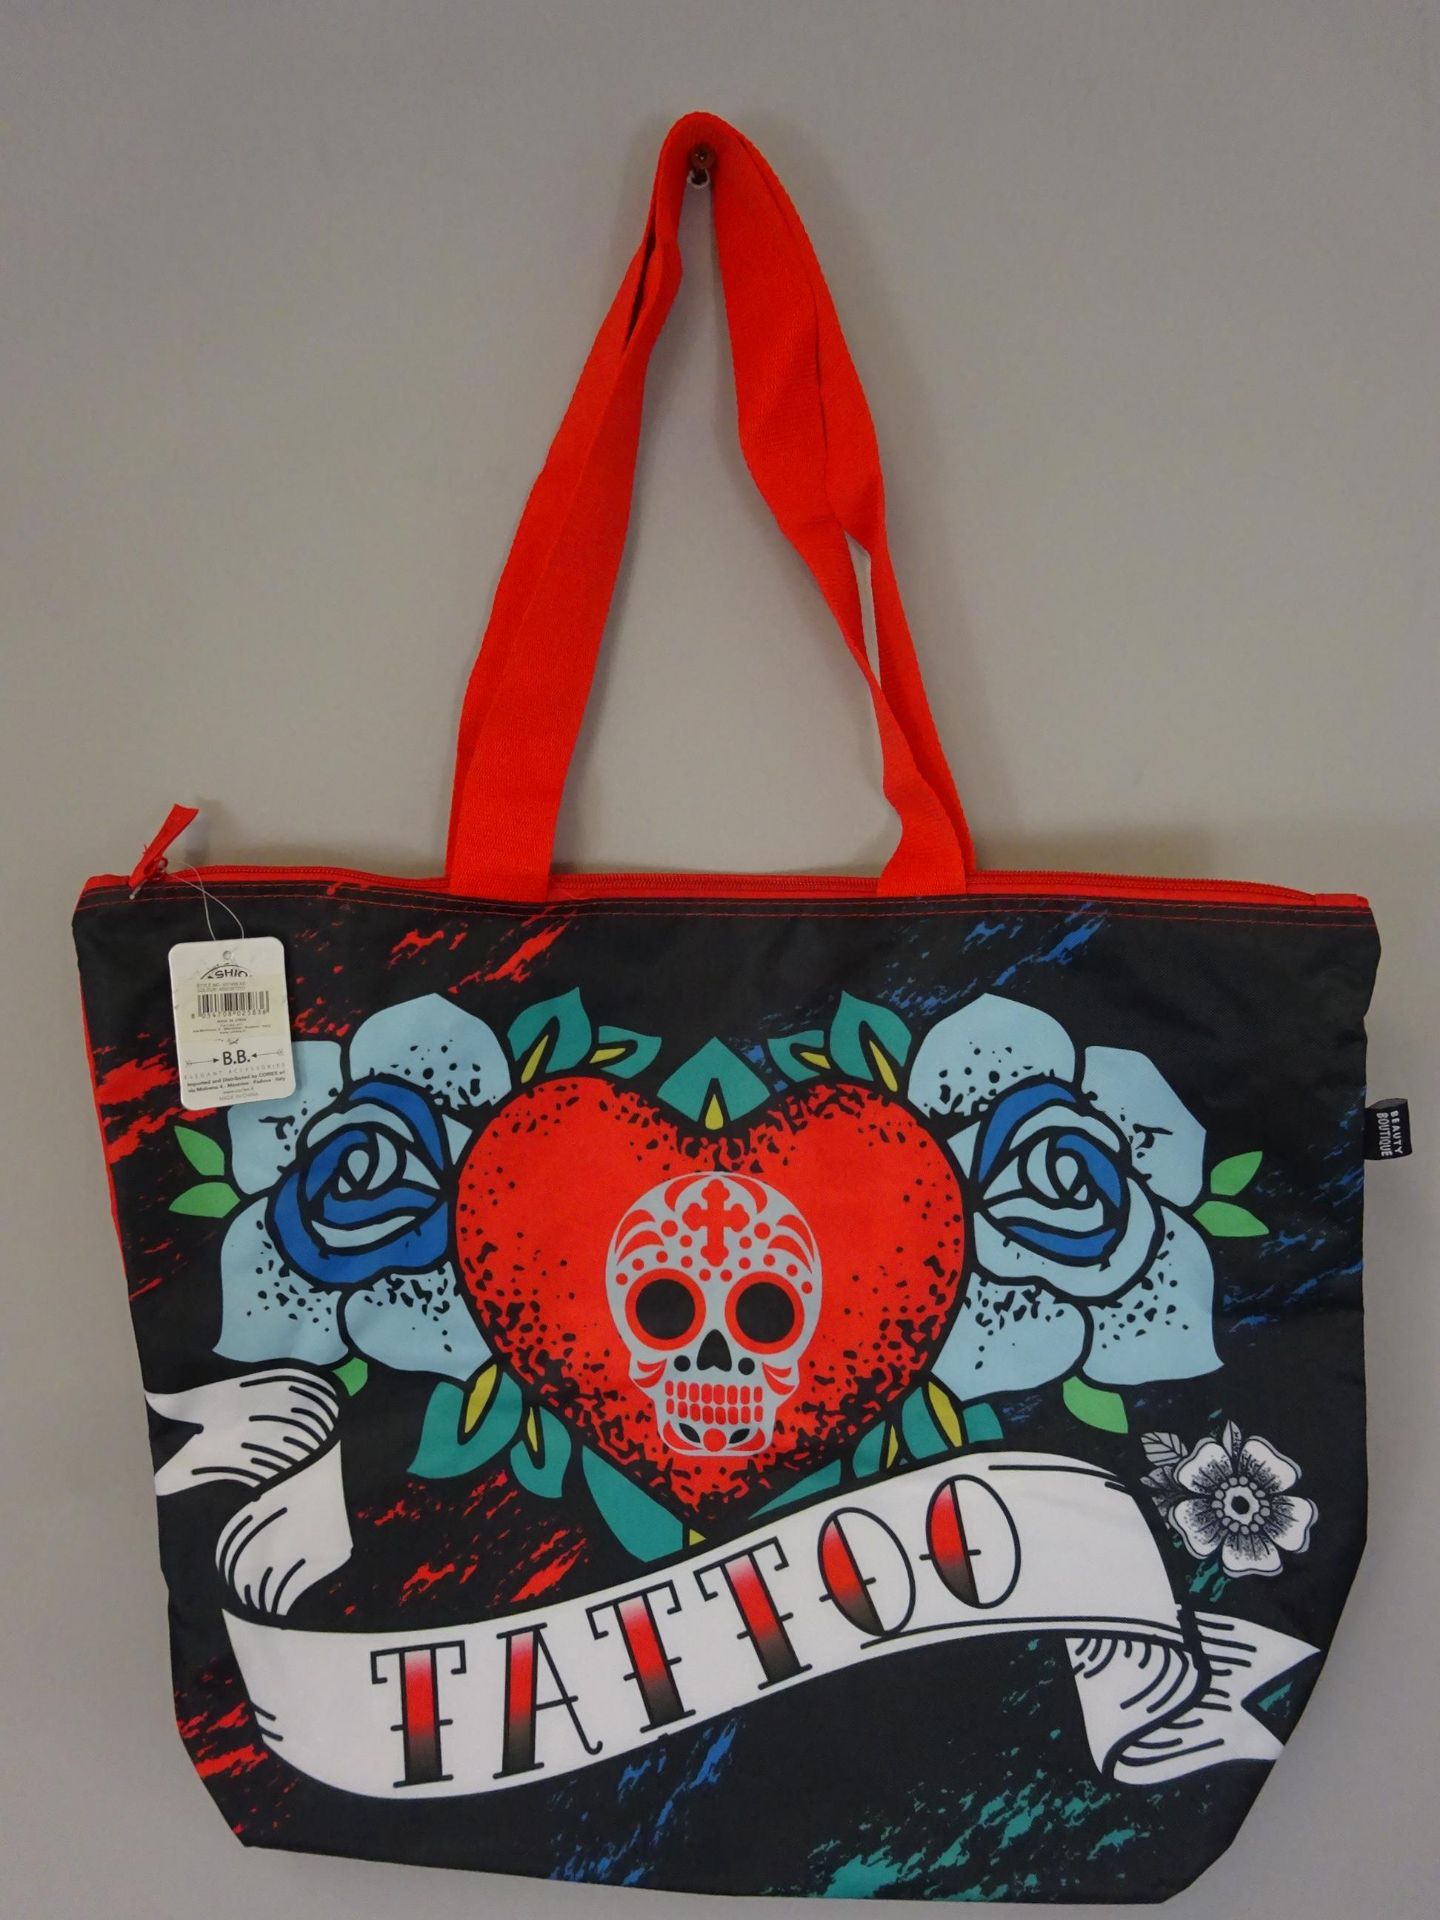 New Black & Red Tattoo Patterend Beach Bag